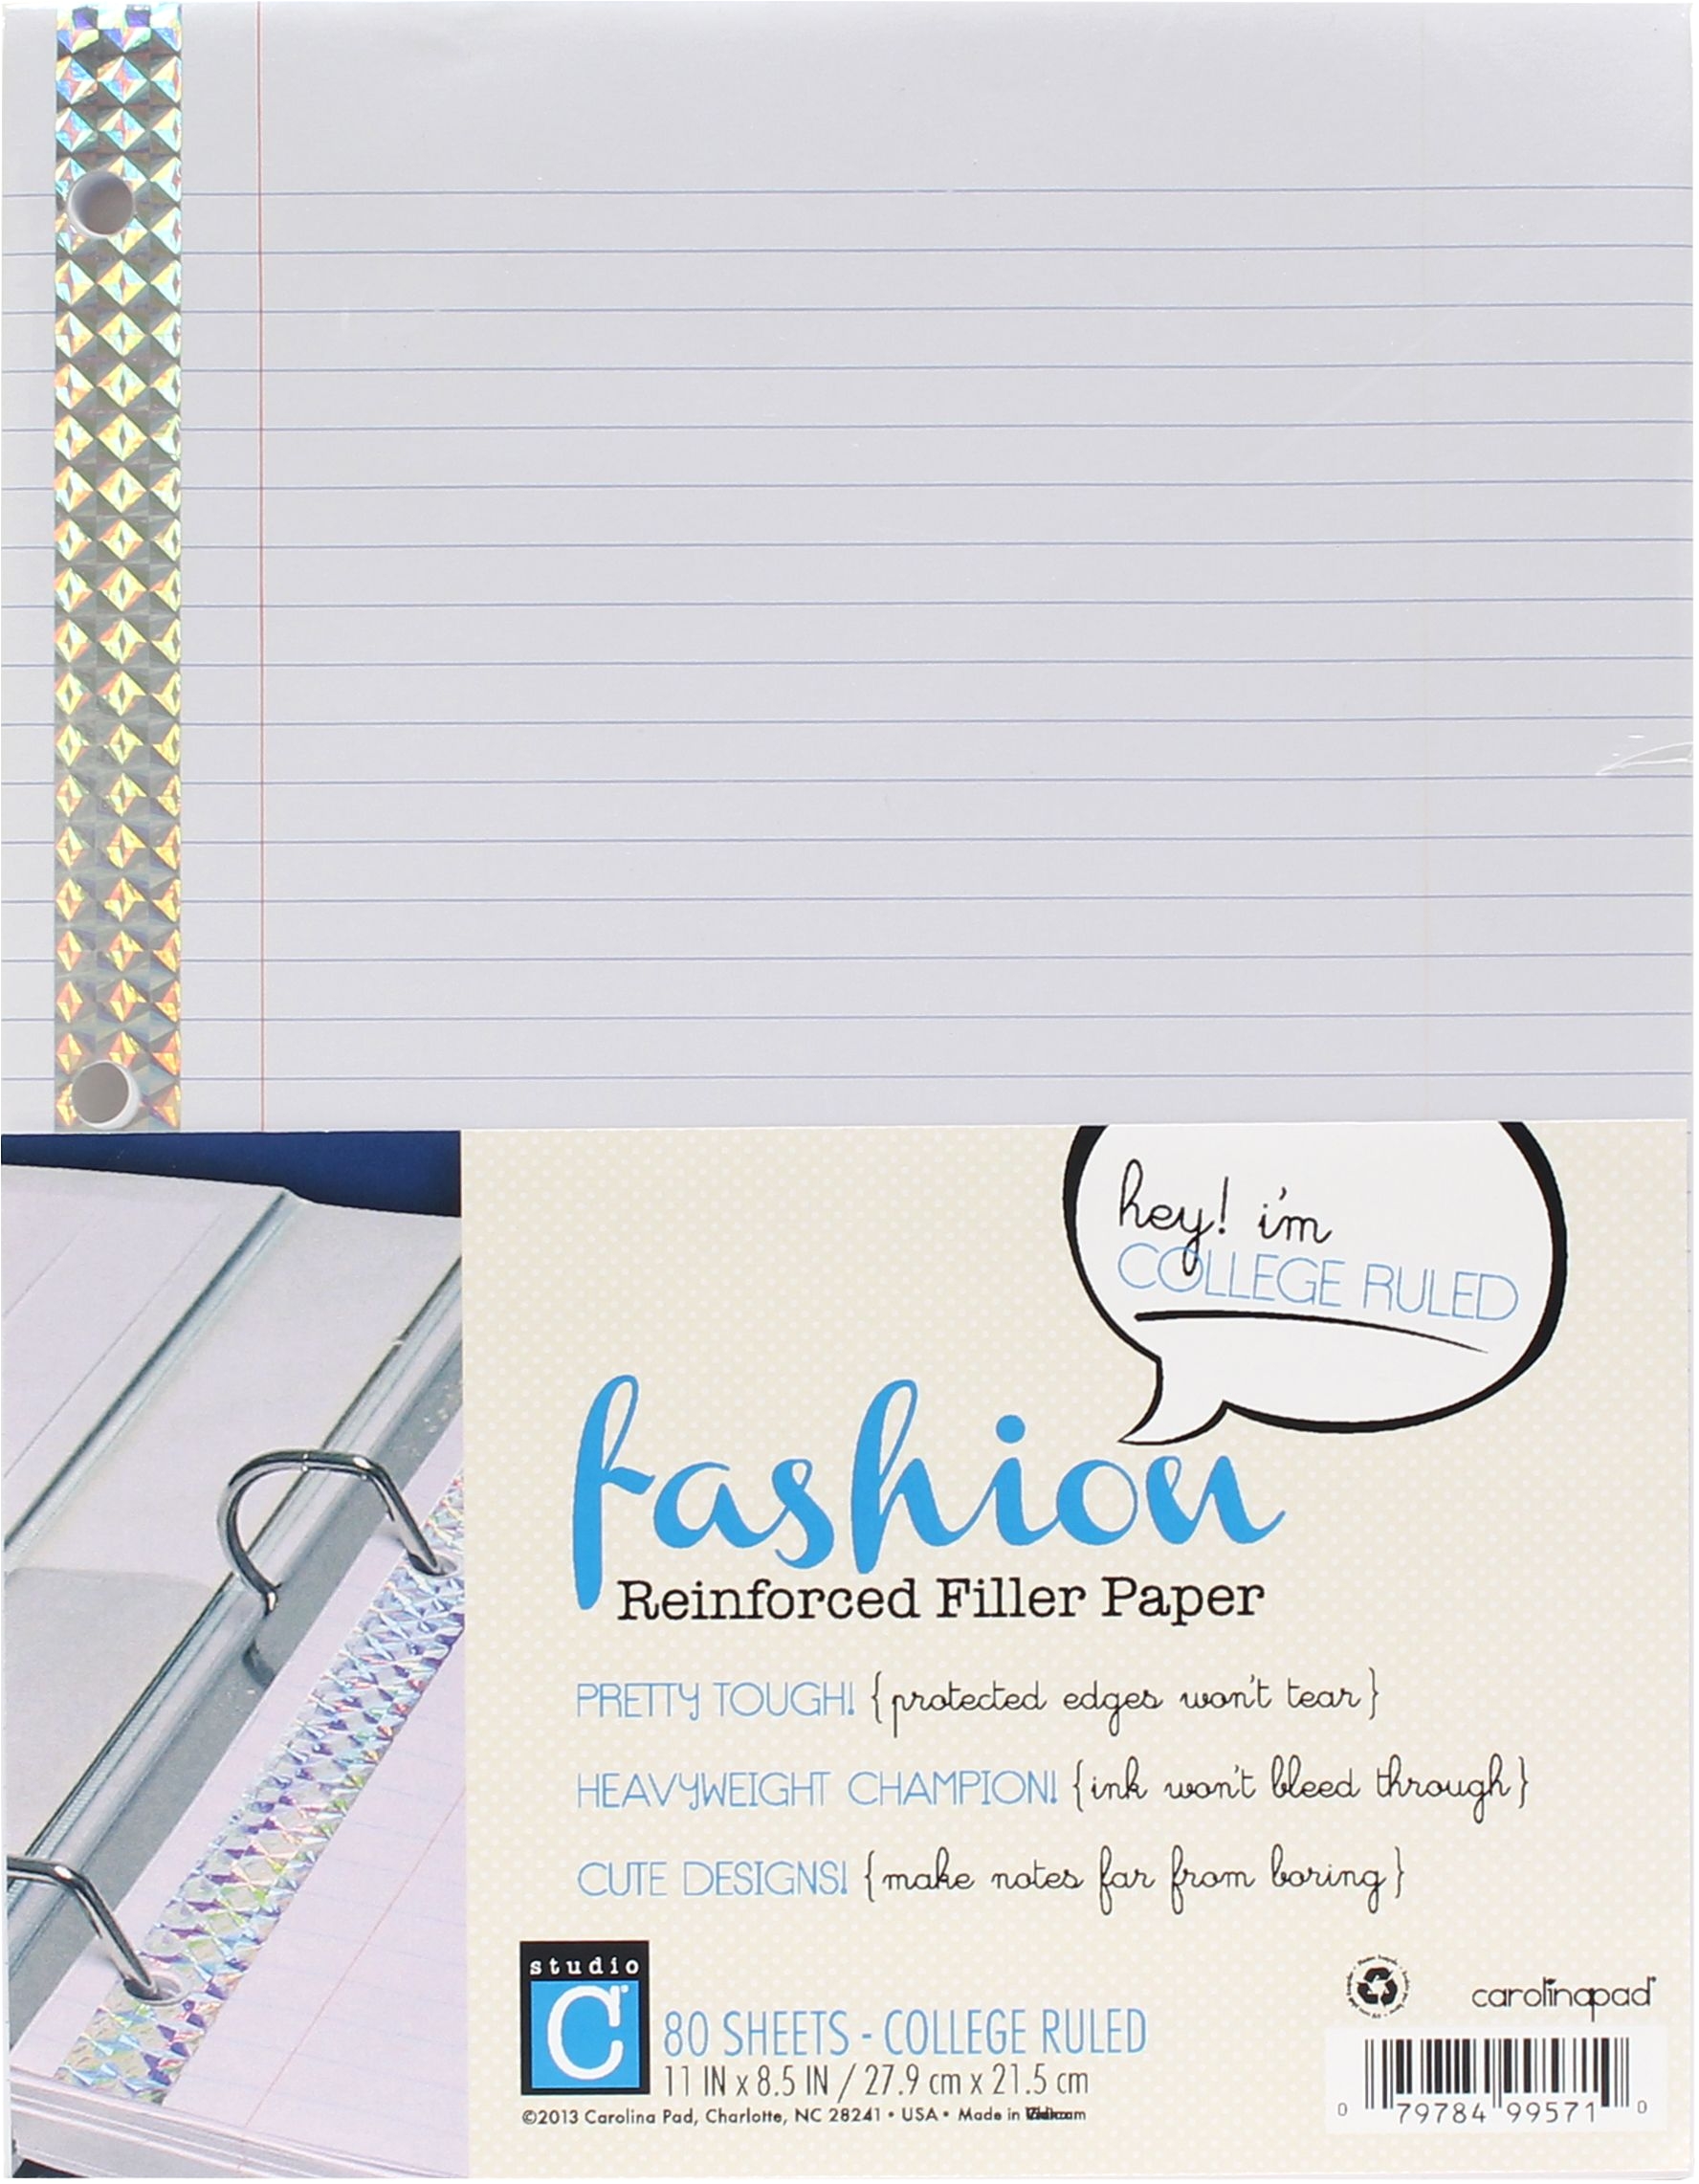 studio c silver fashion reinforced filler paper available at staples stores nationwide backtoschool backtoschoolwithstudioc